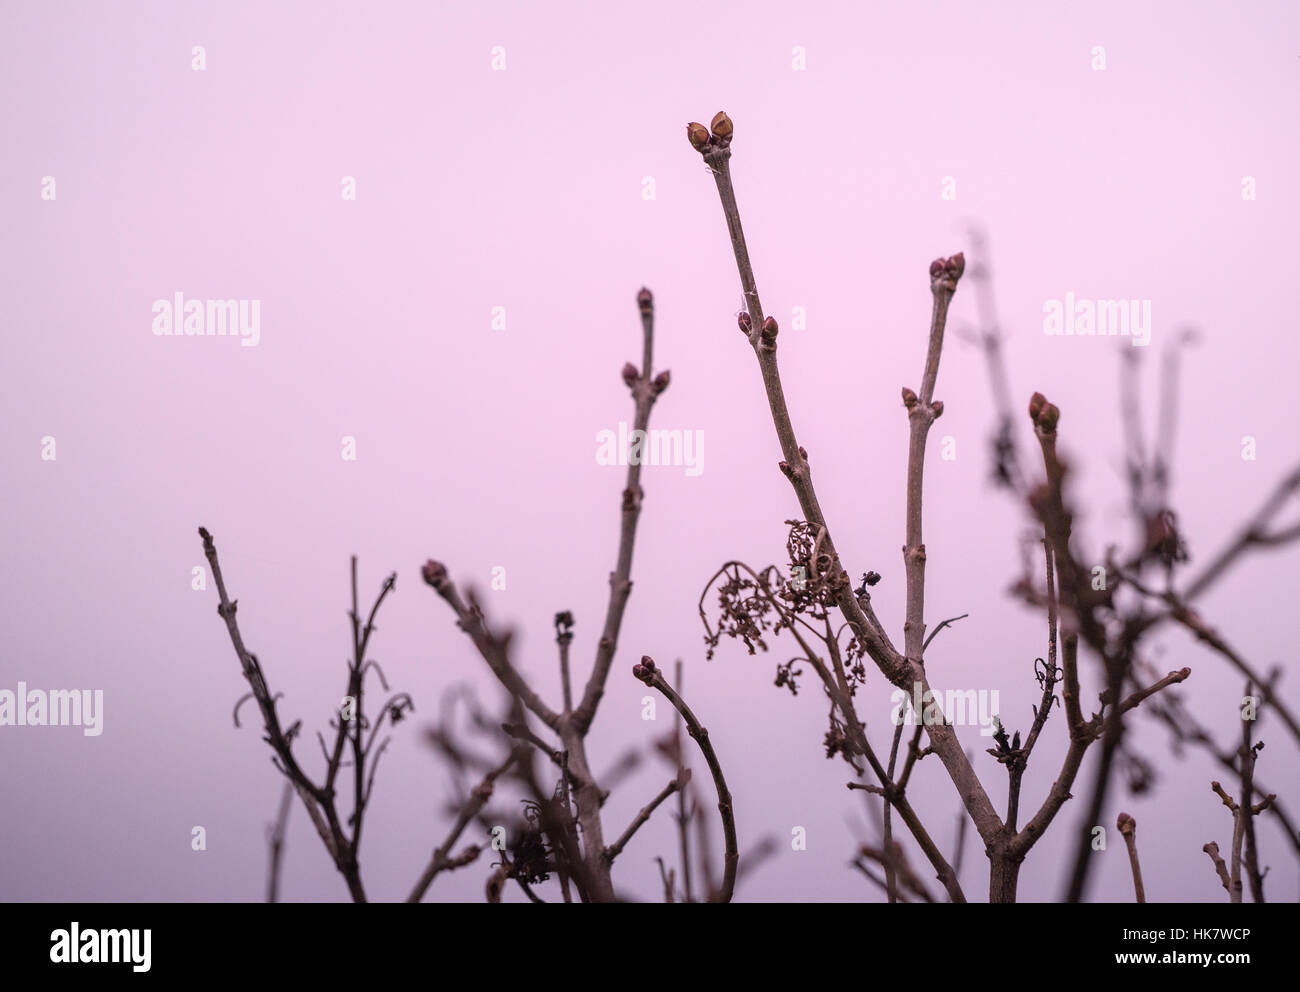 Abstract plants with seeds in front of a purple sky Stock Photo